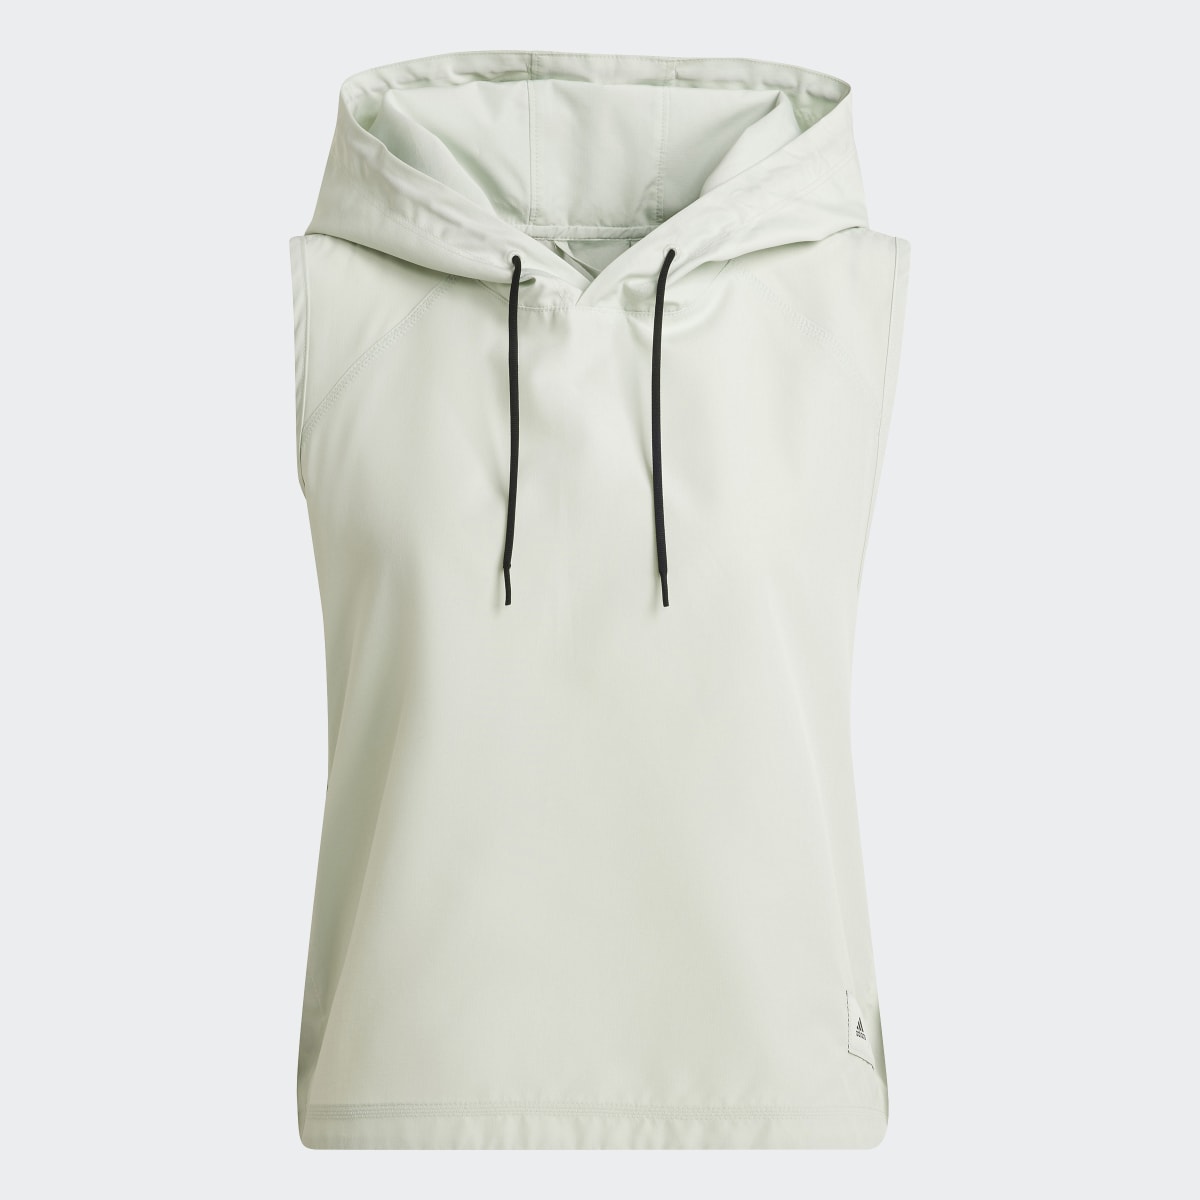 Adidas Parley Run for the Oceans Hooded Top. 5